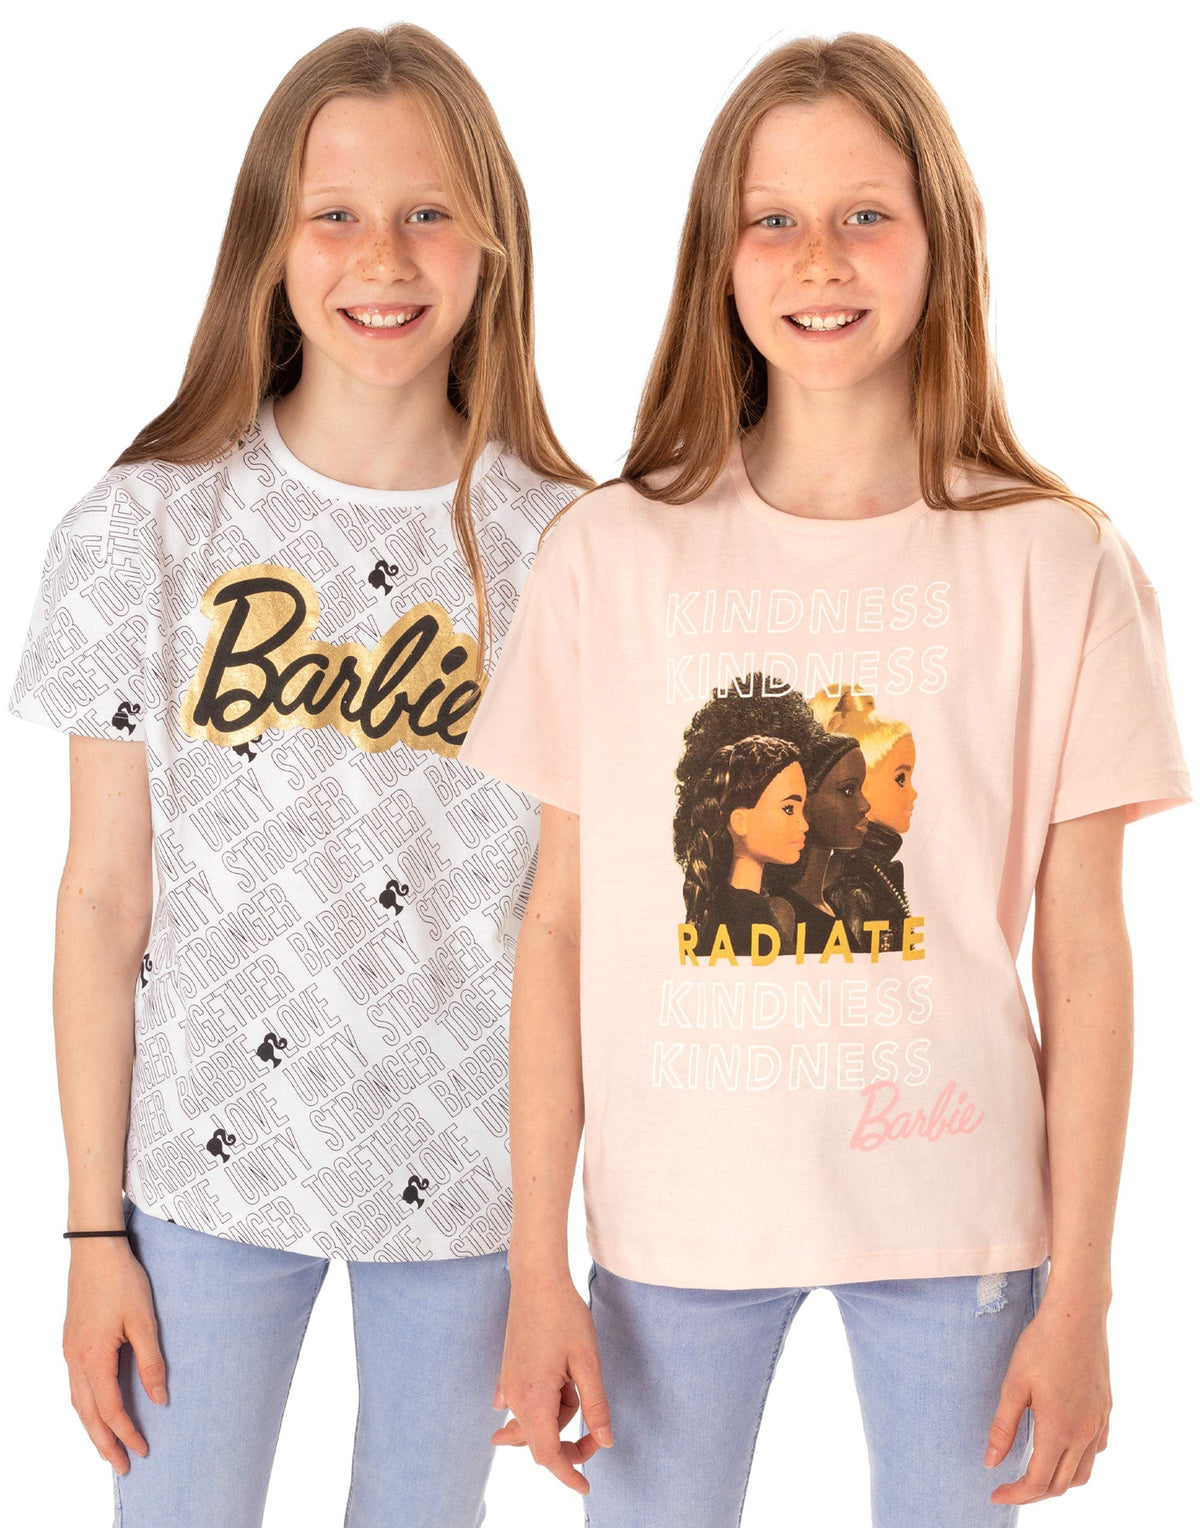 Barbie T-Shirt for Girls 2 Pack | Kids Inspiring Doll Logo Pink White Short Sleeve Top | Kindness Love Unity Clothes 7-8 Years